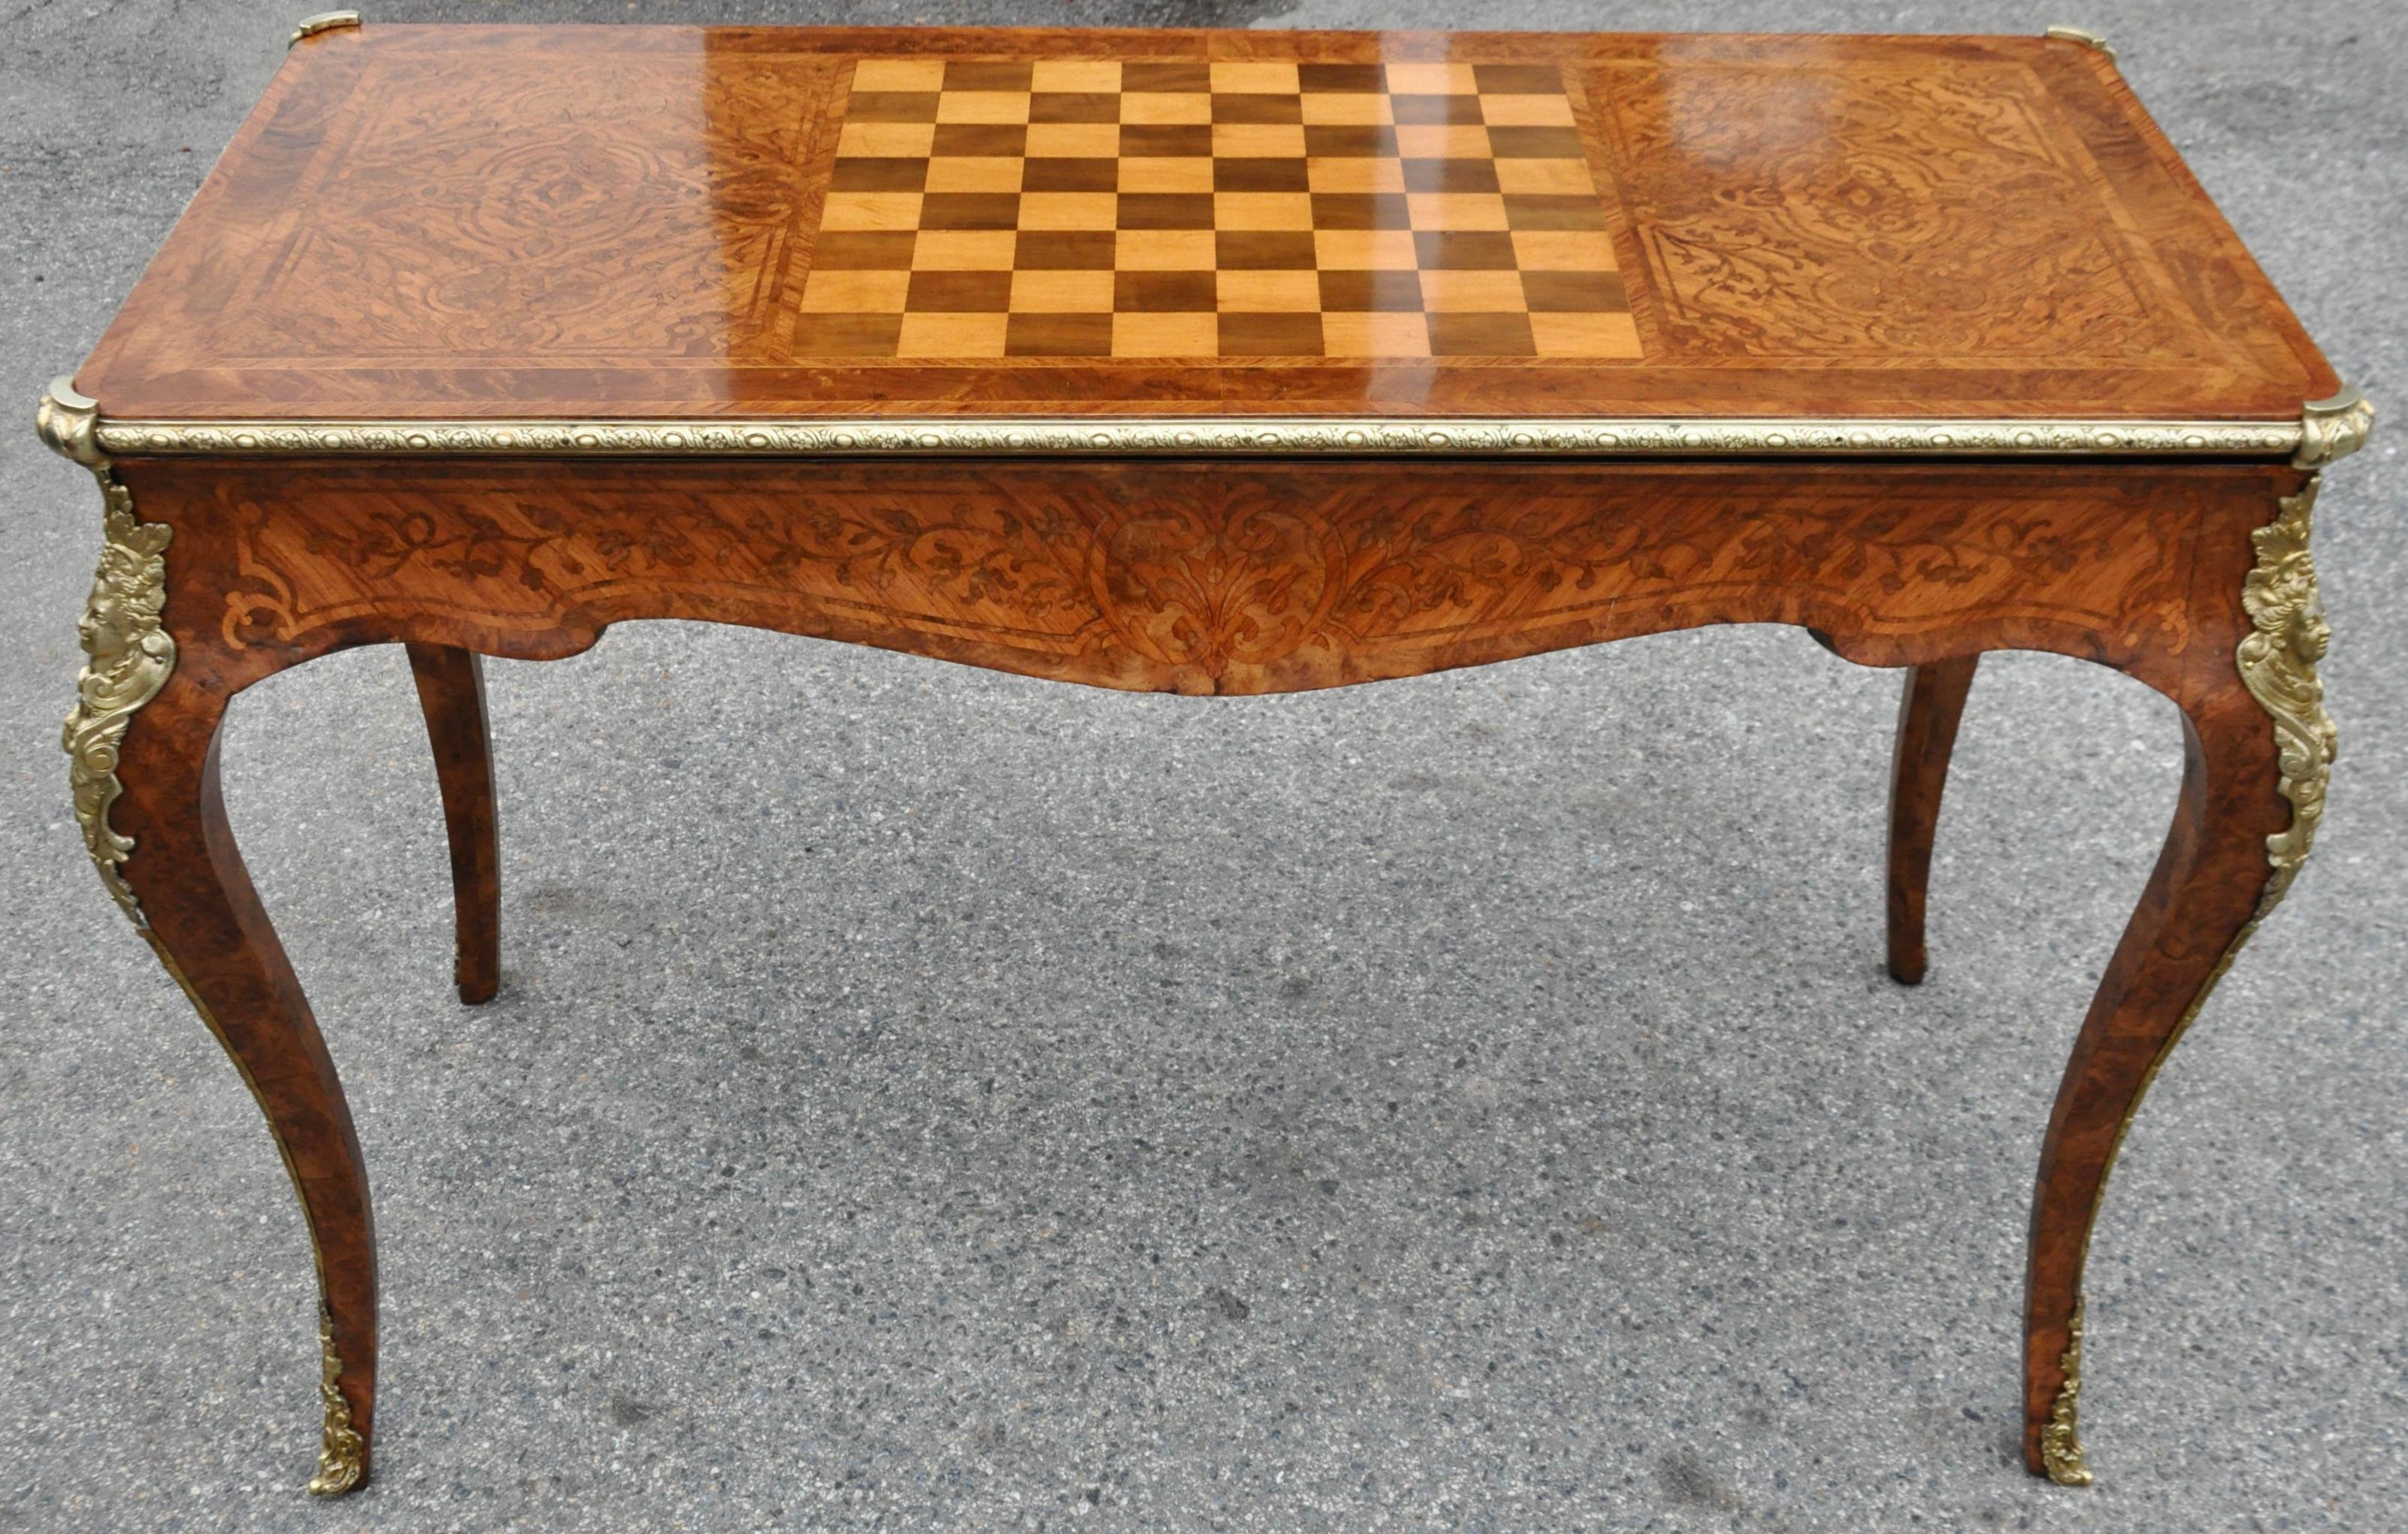 19th Century French Kingwood Regence Style Tric-Trac Games Table For Sale 1